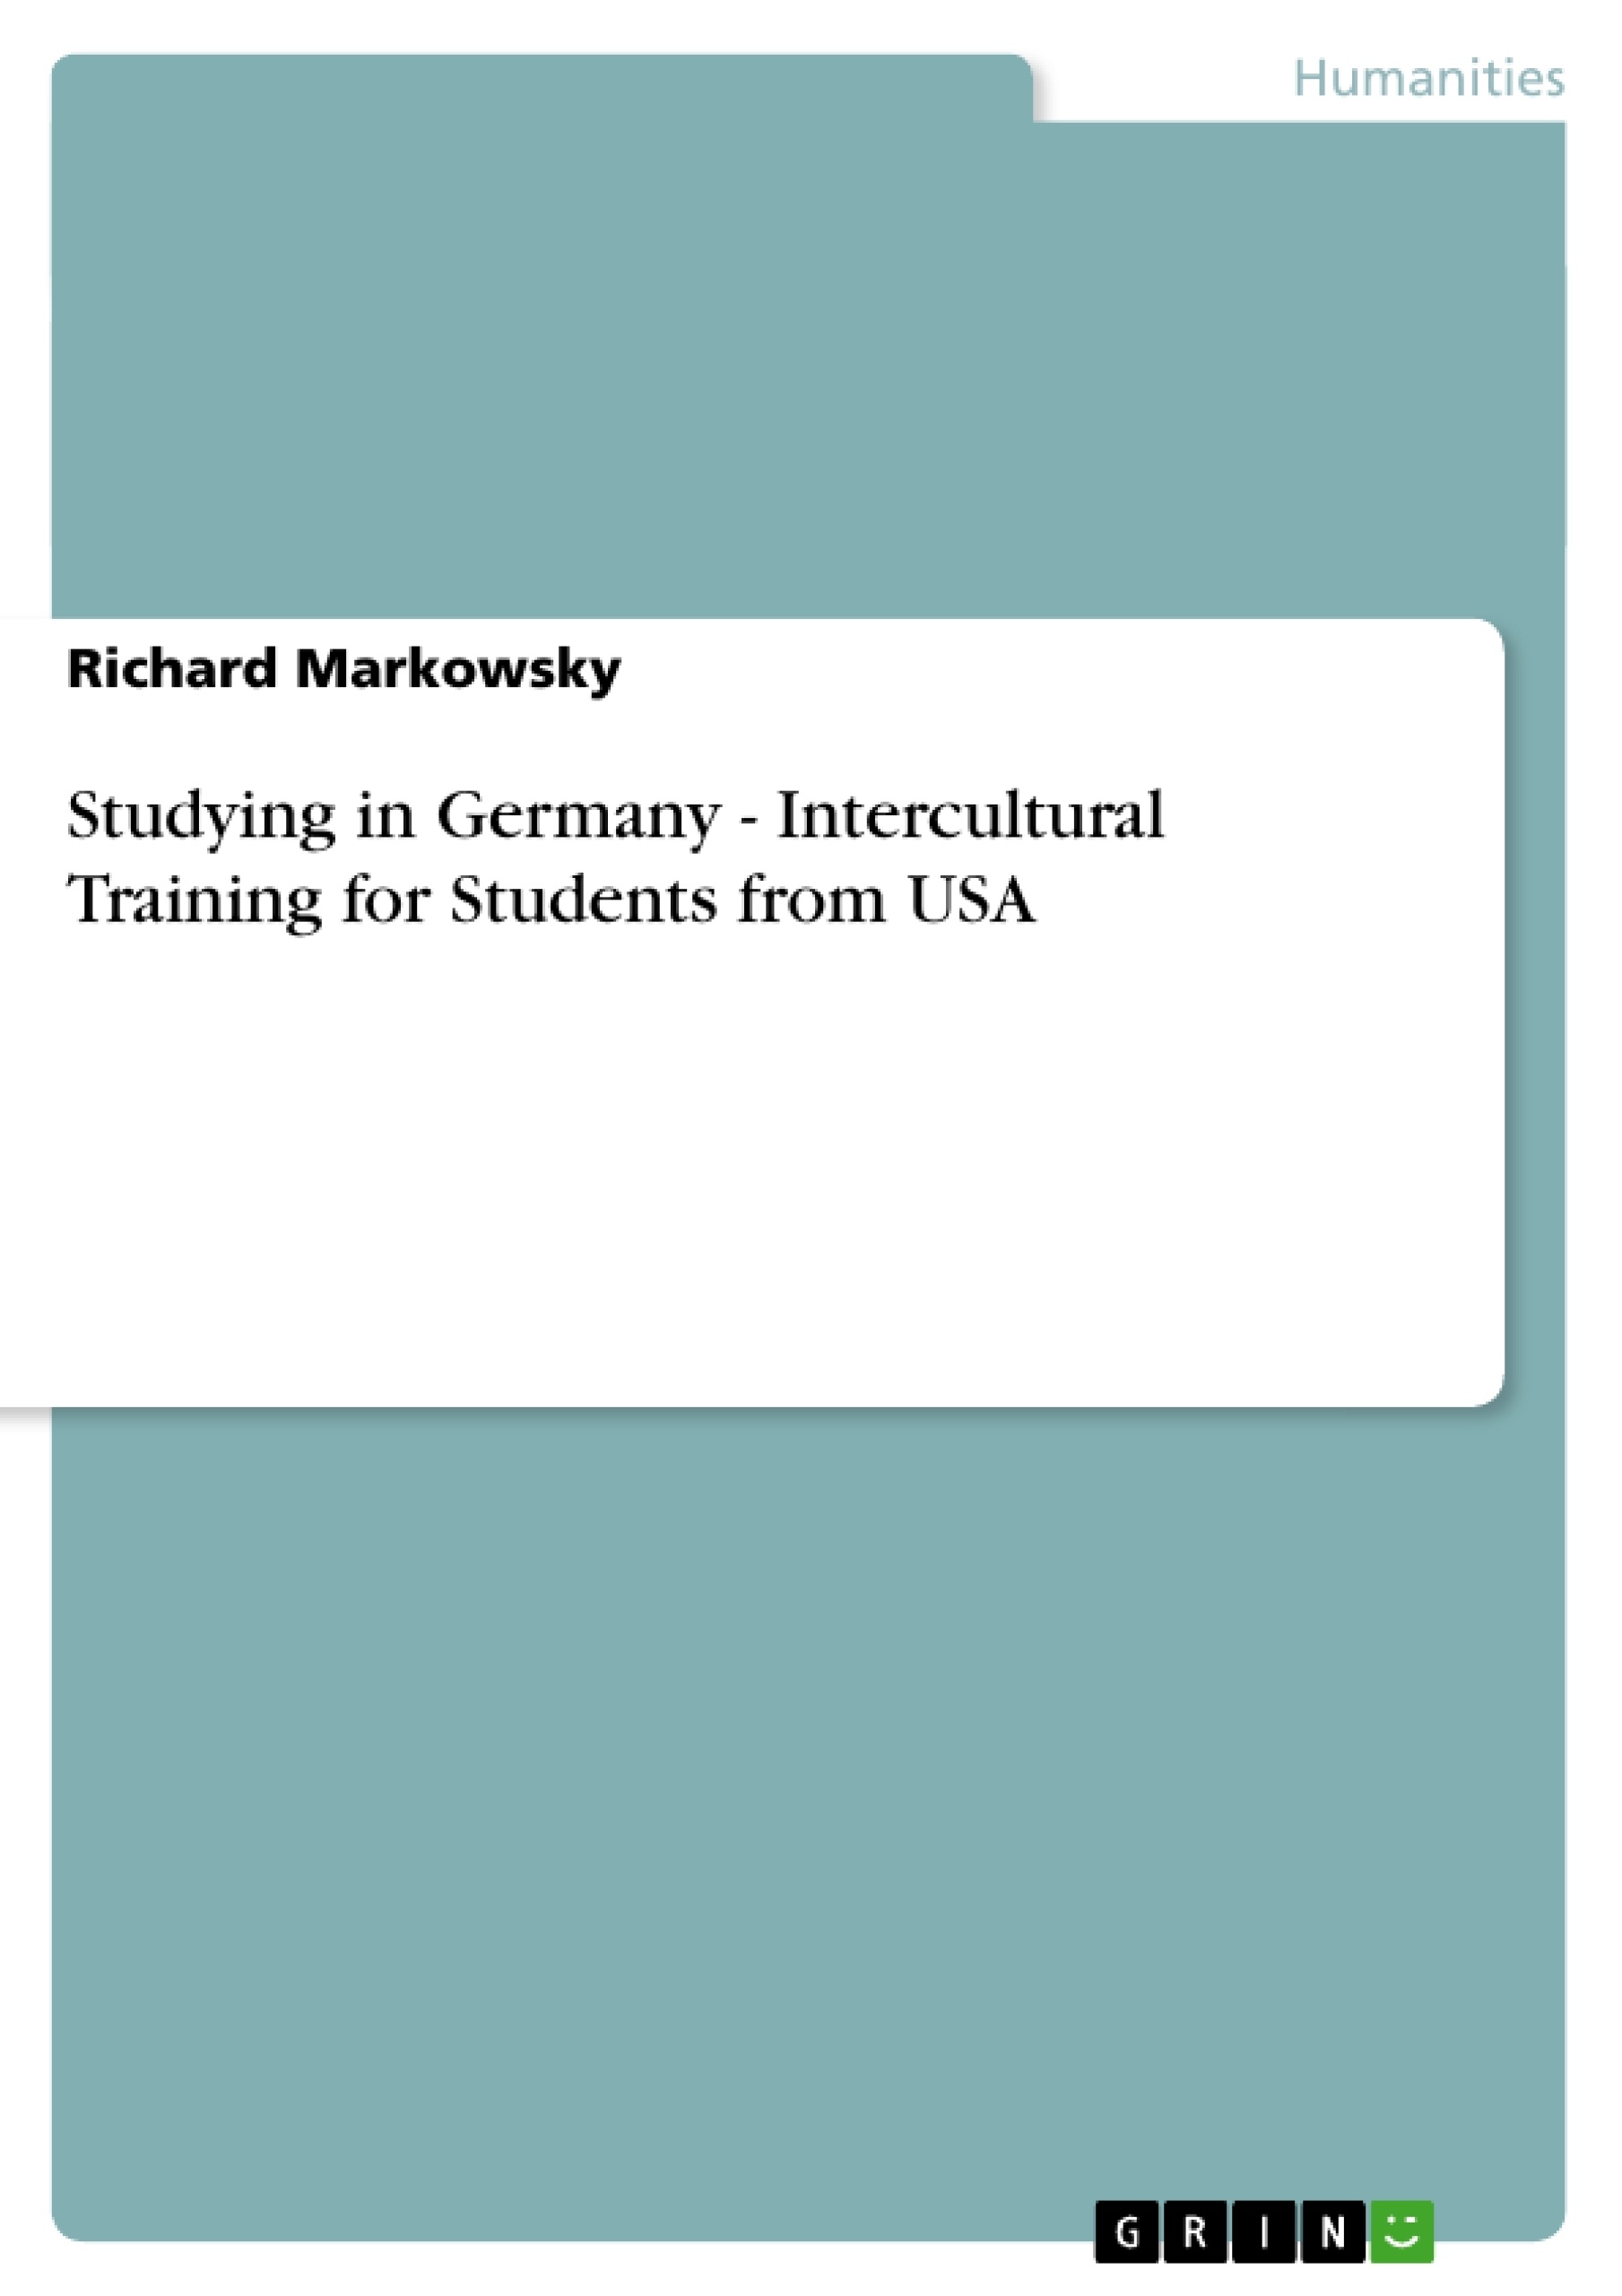 Title: Studying in Germany - Intercultural Training  for Students from USA